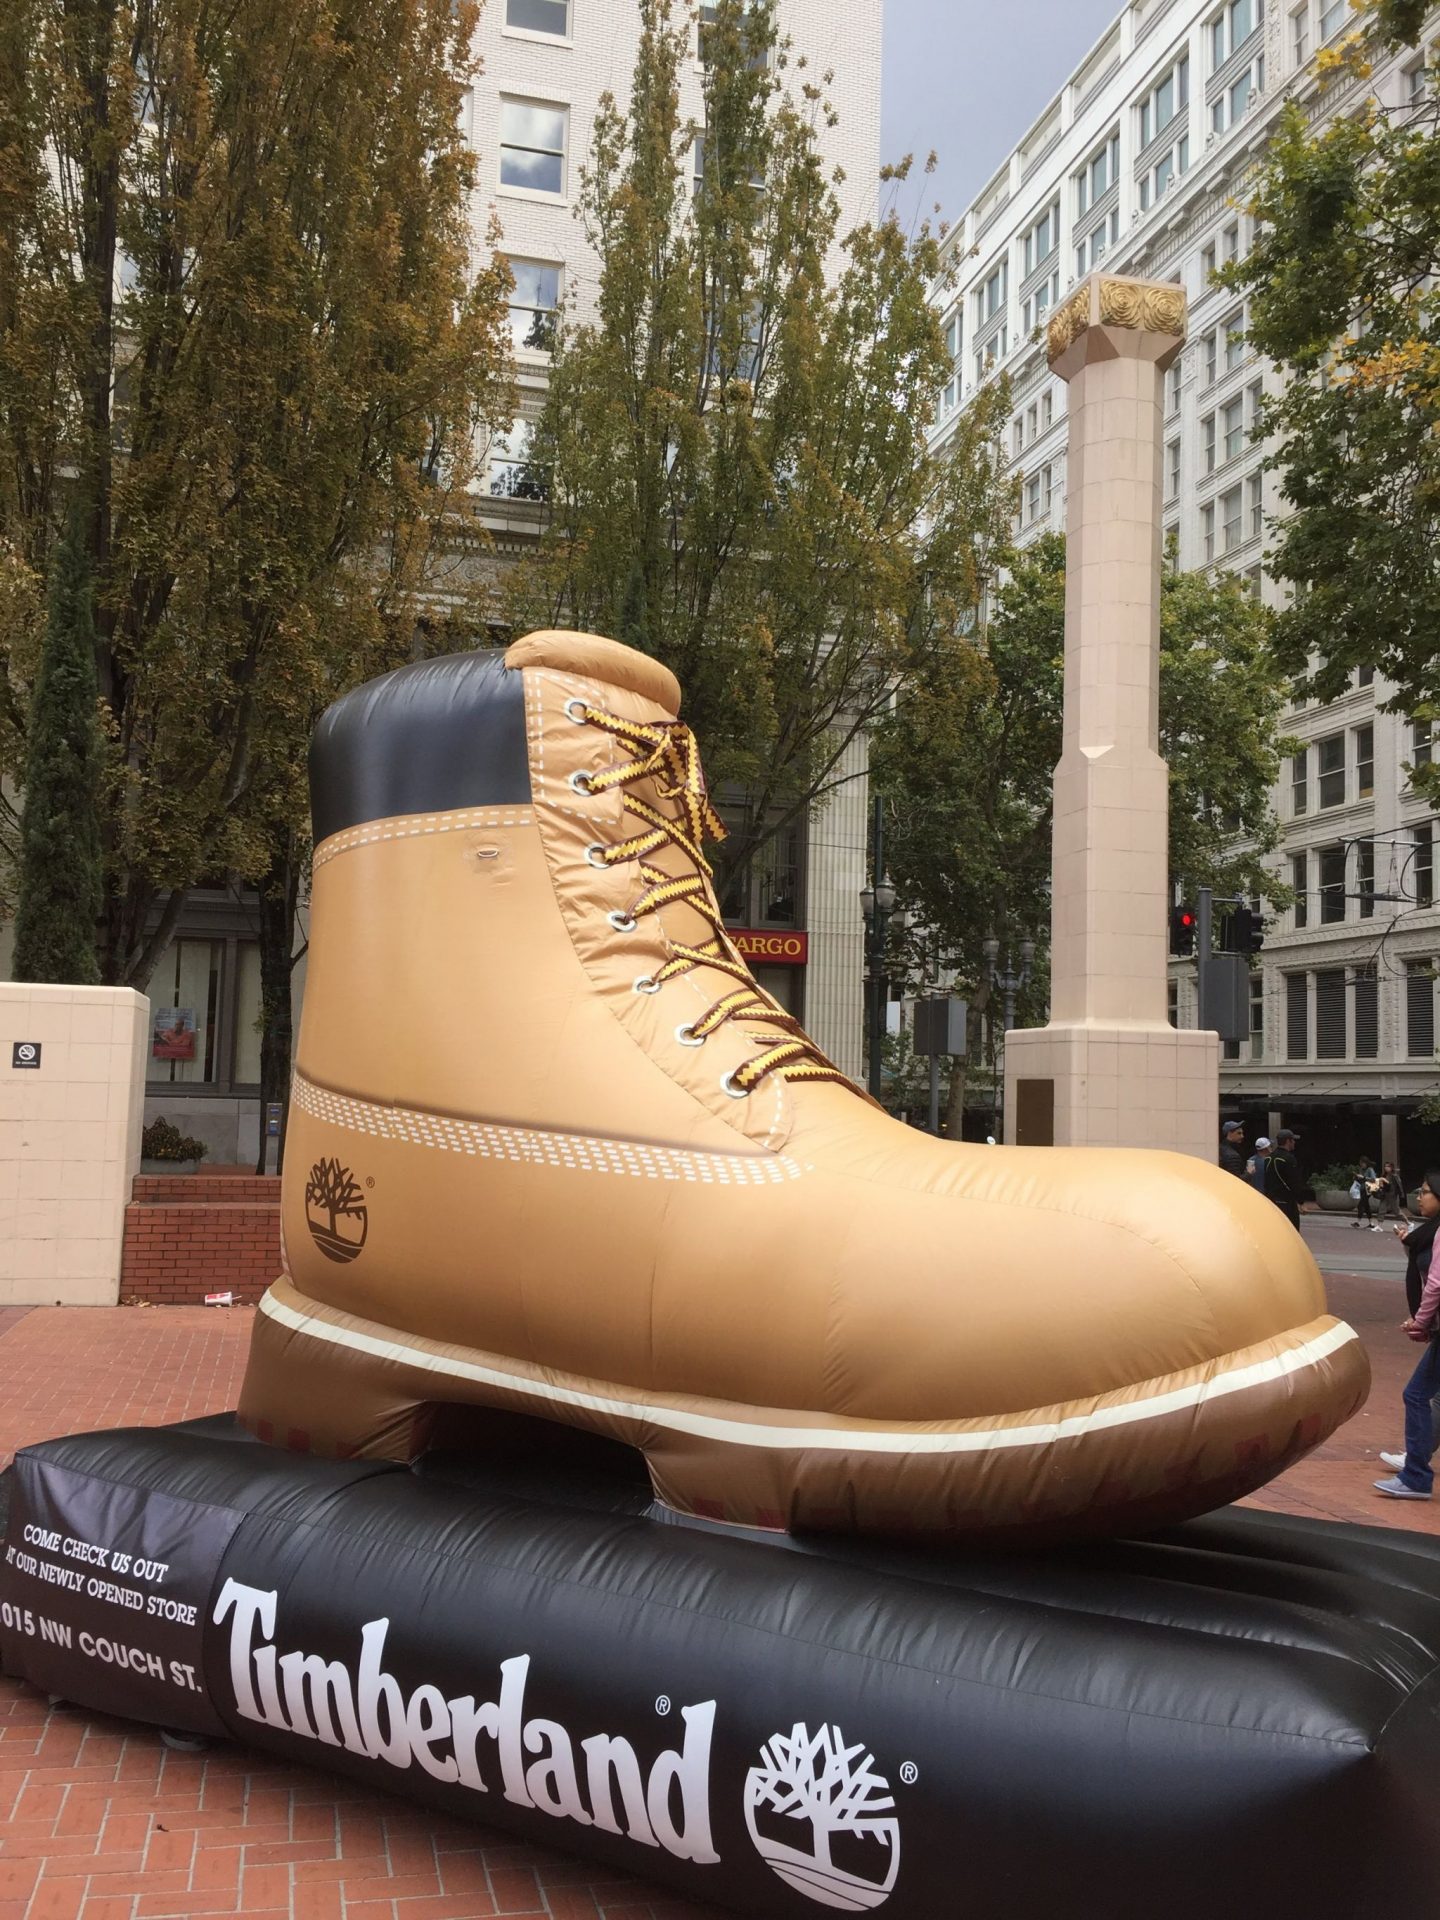 Giant Timberland shoe in the Pacific North West